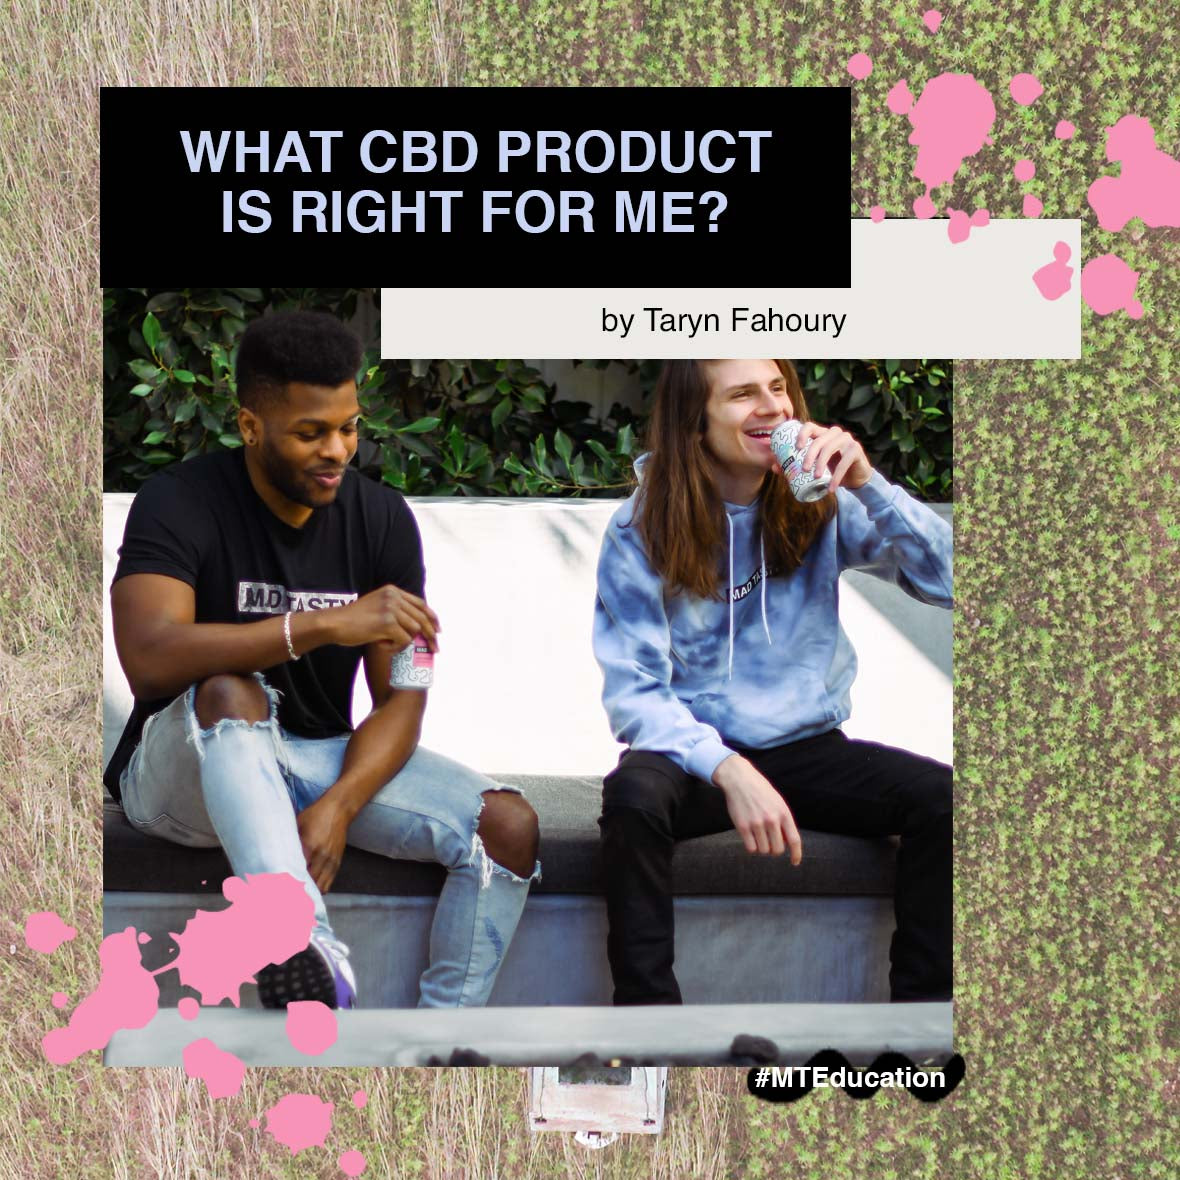 WHAT CBD PRODUCT IS RIGHT FOR ME?